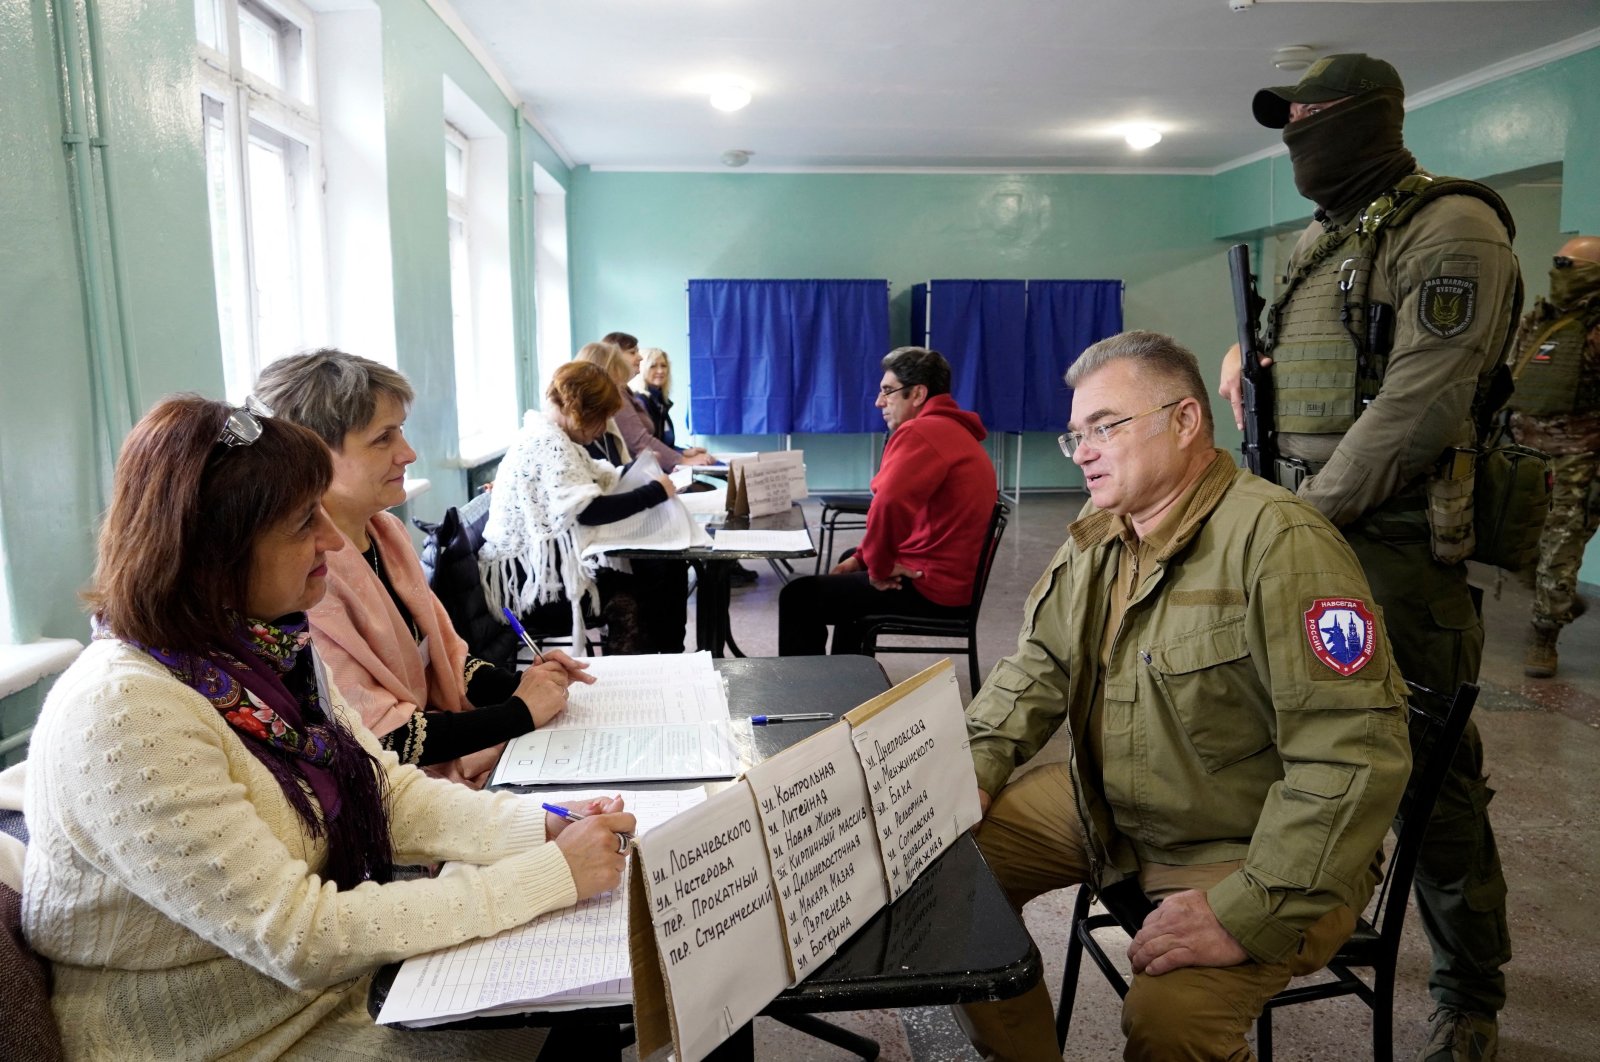 Konstantin Ivashchenko (3rd R), former CEO of the Azovmash plant and appointed pro-Russian mayor of Mariupol, visits a polling station, Mariupol, Ukraine, Sept. 27, 2022. (AFP Photo)